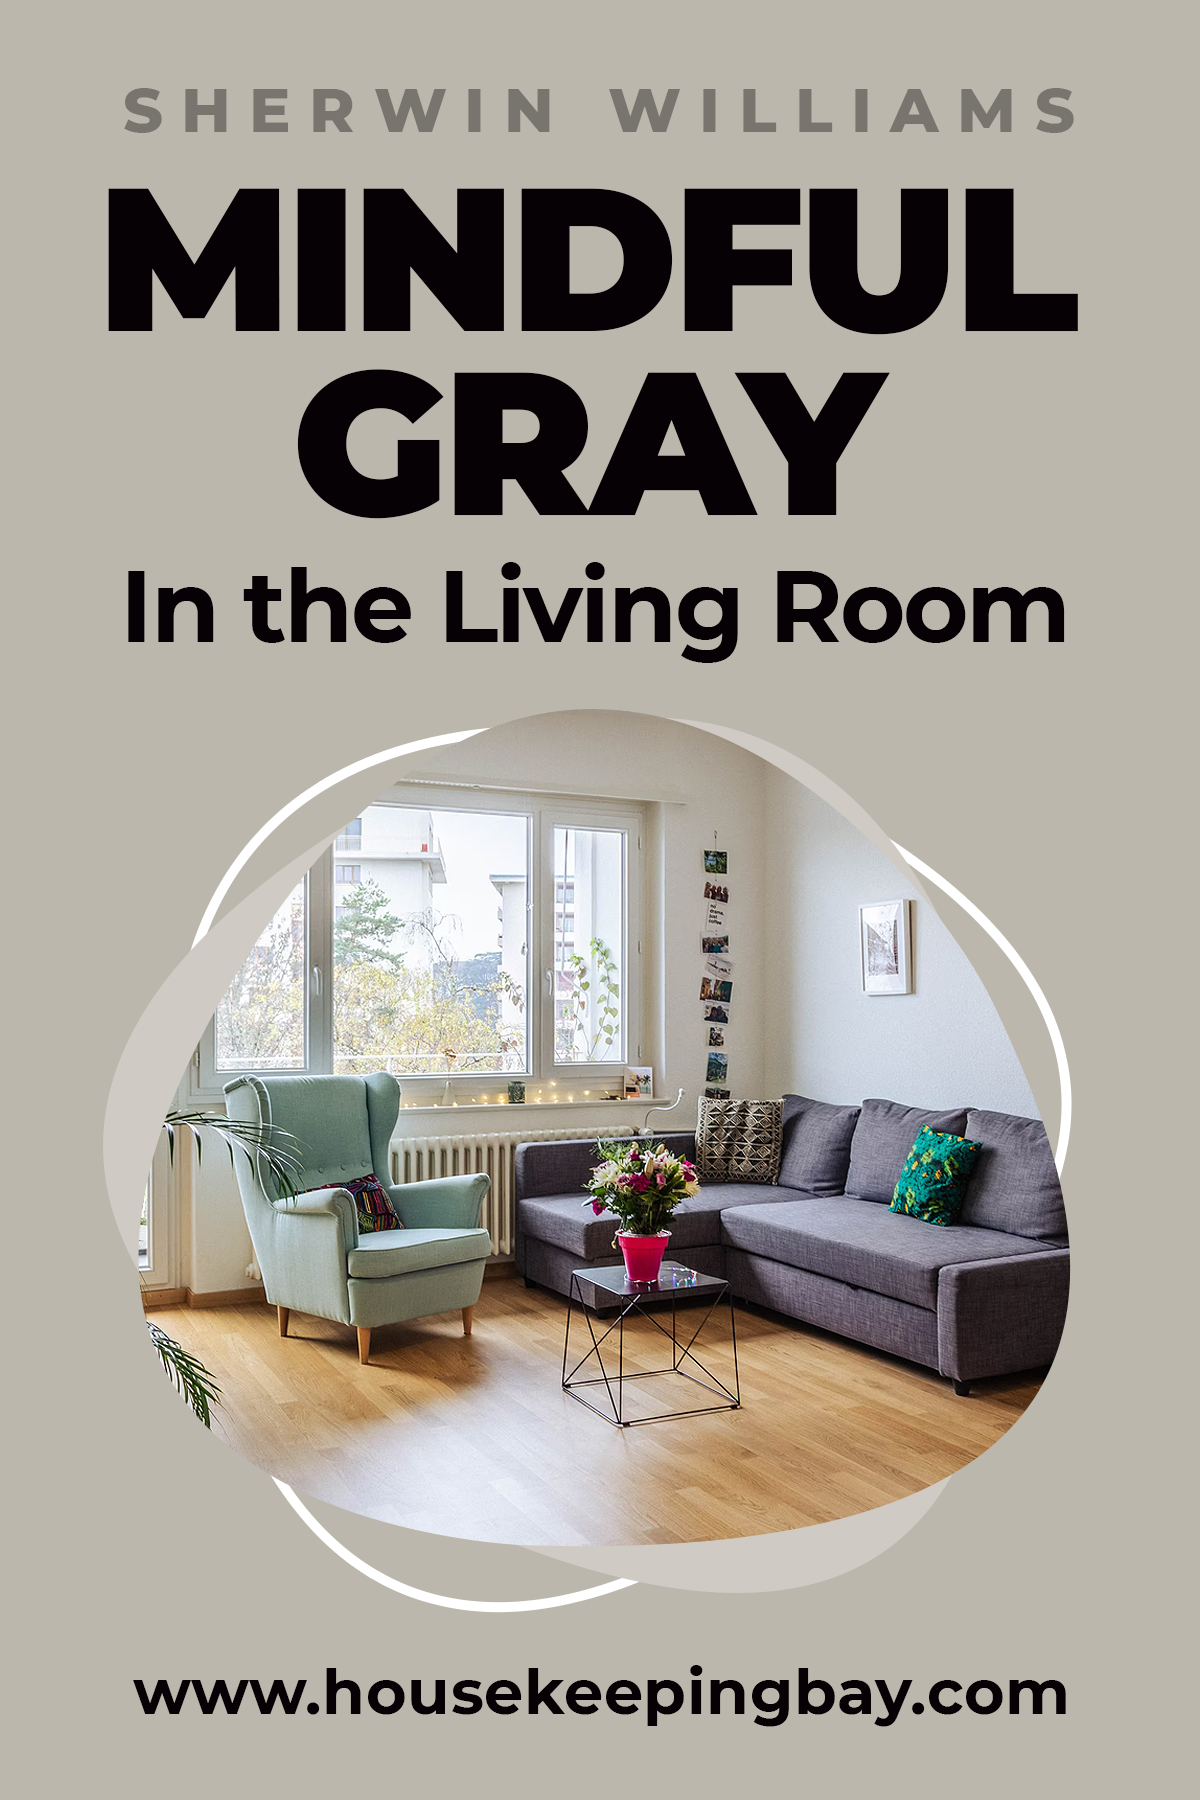 Mindful Gray In the Living Room